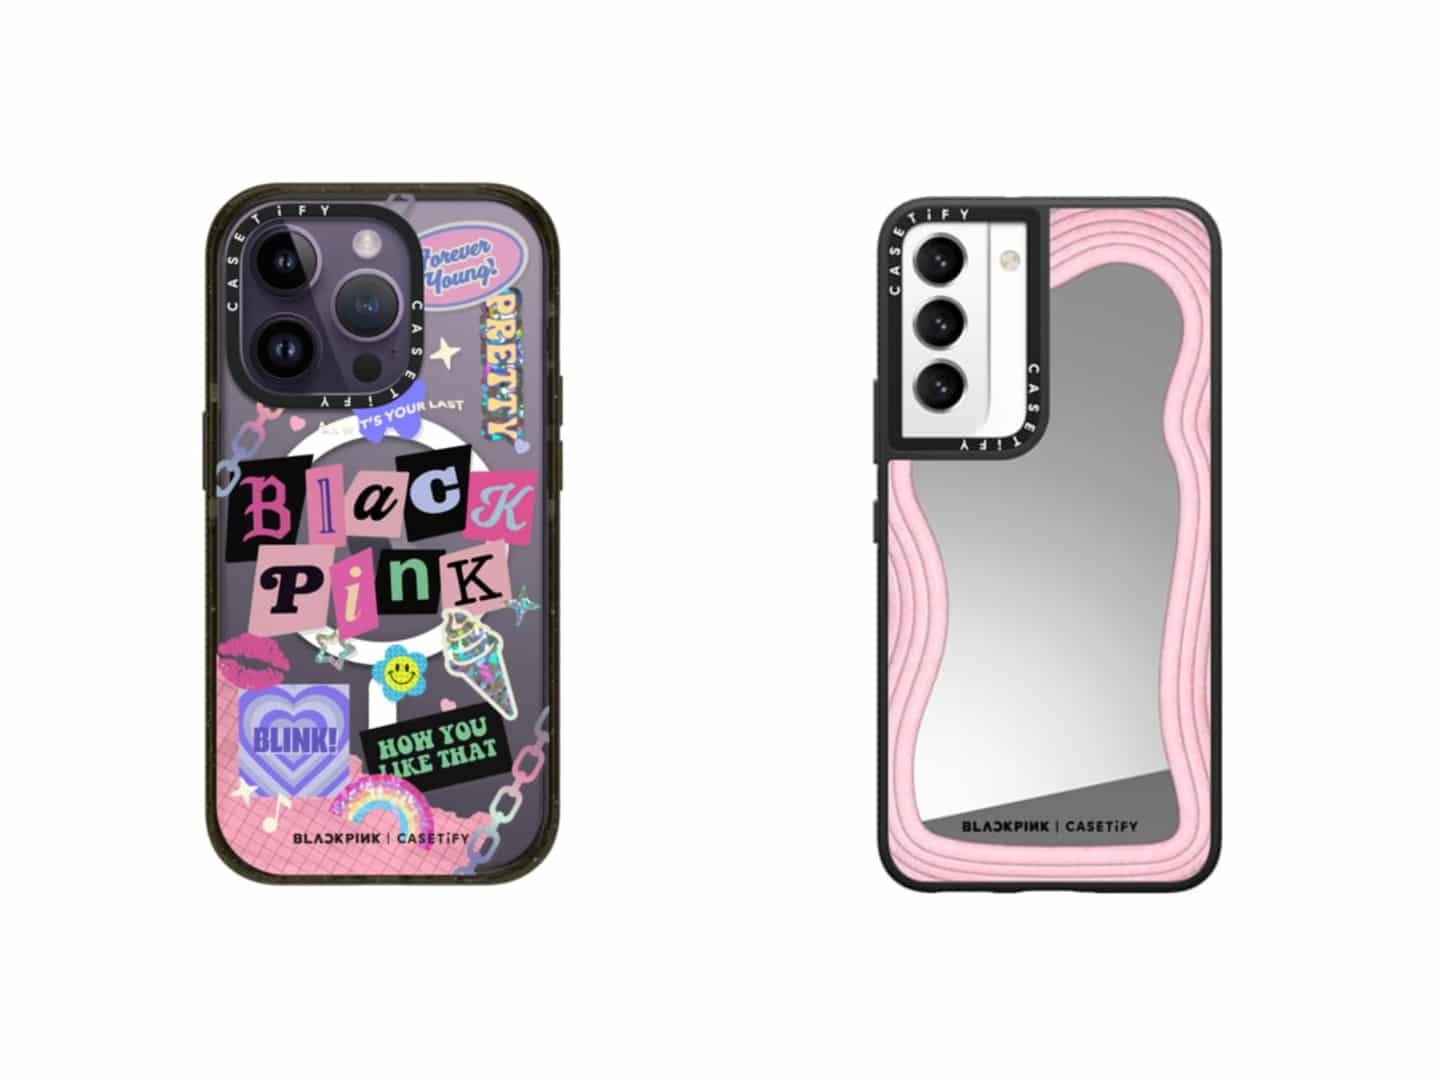 The BLACKPINK x Casetify collaboration features a number of phone case designs.